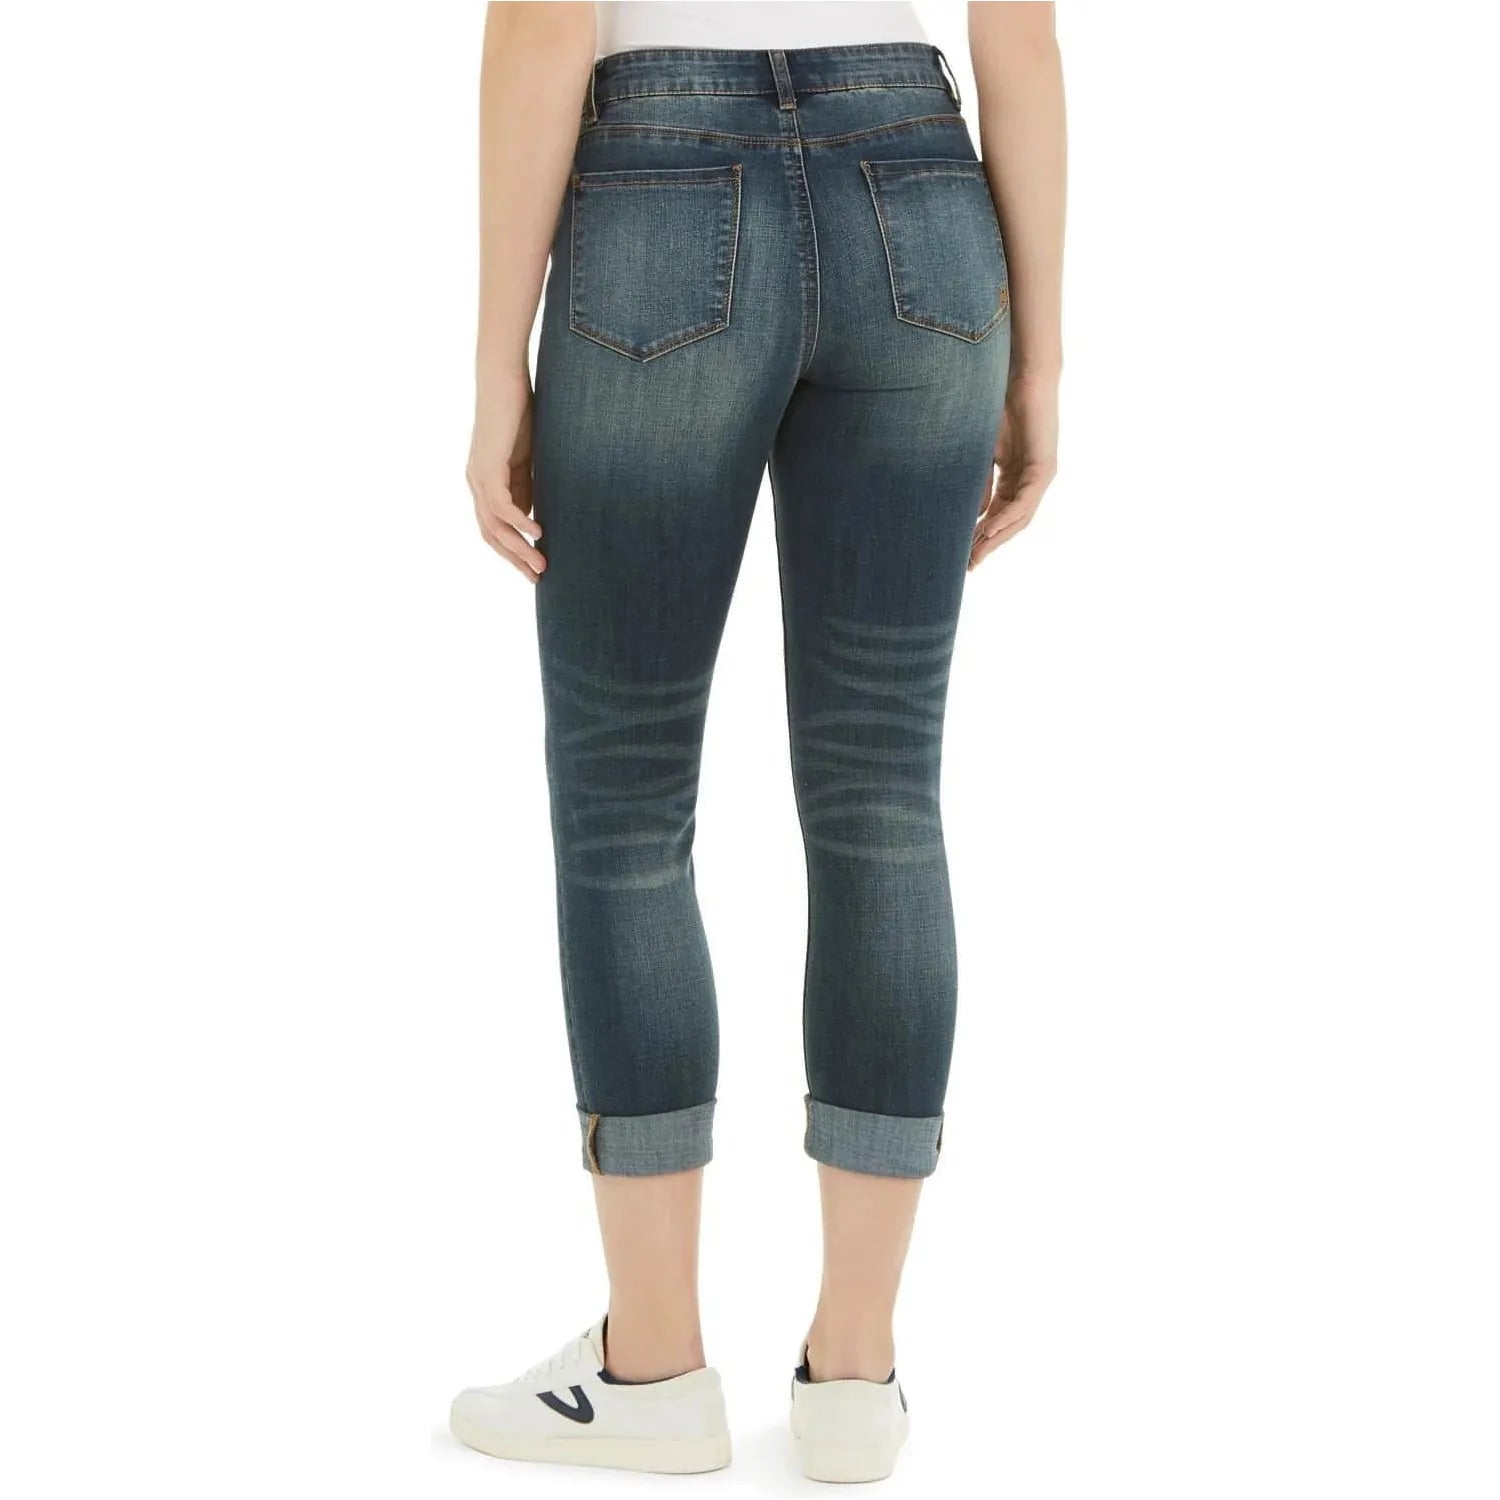 Indigo Rein Juniors' Cuffed Cropped Skinny Jeans - Med Blue (Size 0) - Brandat Outlet